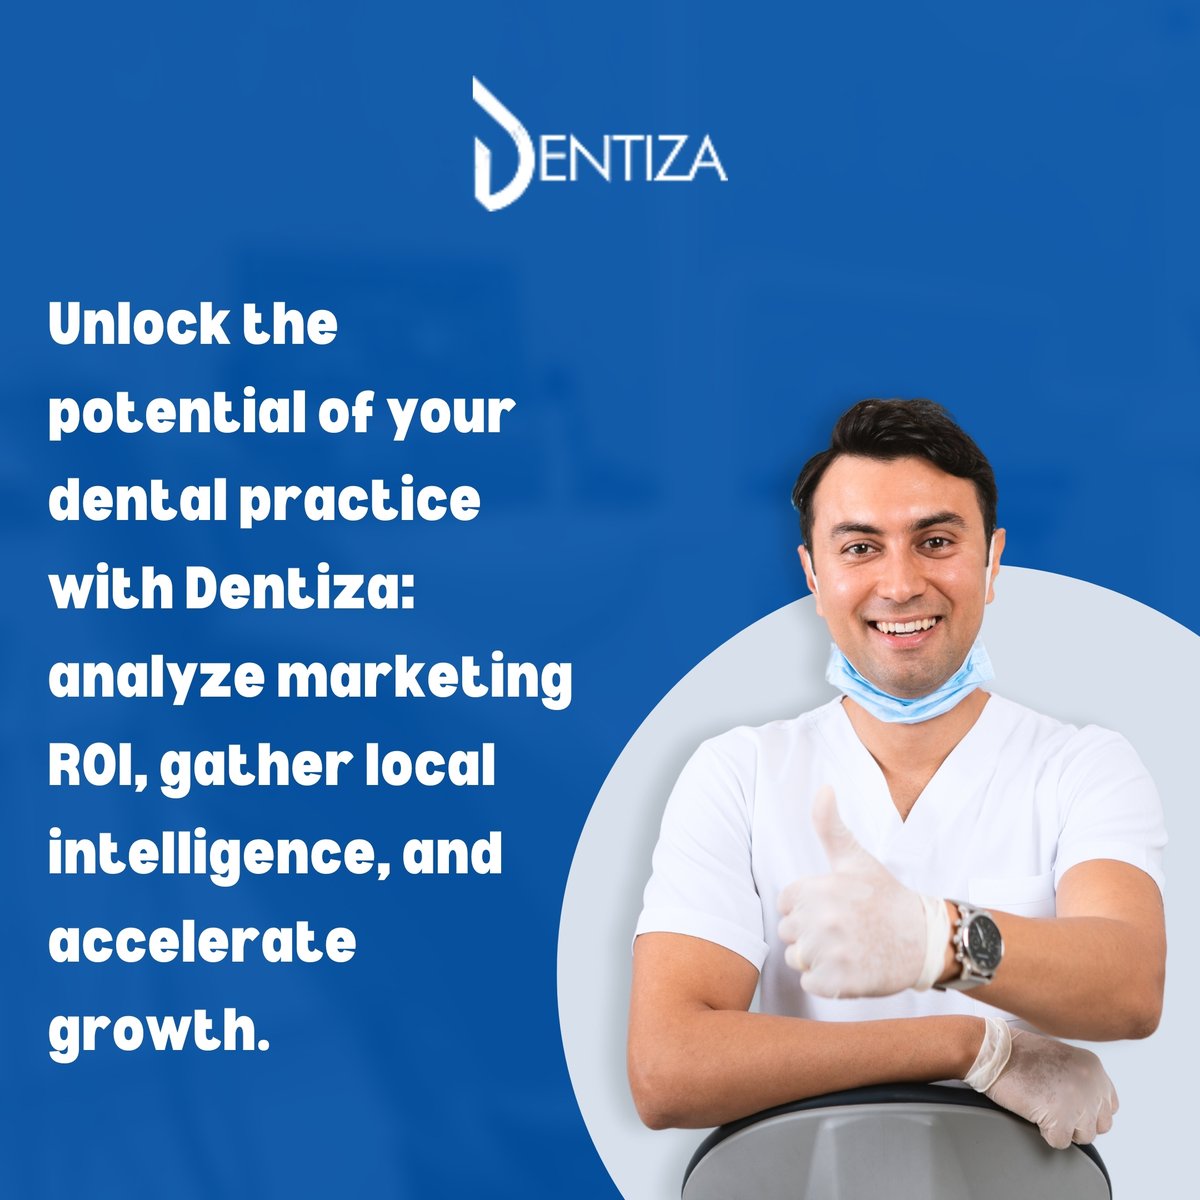 Maximize your impact and reach new heights of success with Dentiza!
.
𝑳𝒆𝒂𝒓𝒏 𝑴𝒐𝒓𝒆 👉🏻 dentiza.com
.
.
#Dentiza #DentalPatientAcquisition #LeadsGeneration #PreQualifiedPatients #TreatmentAcceptance #TrustBuilding #LocalAuthority